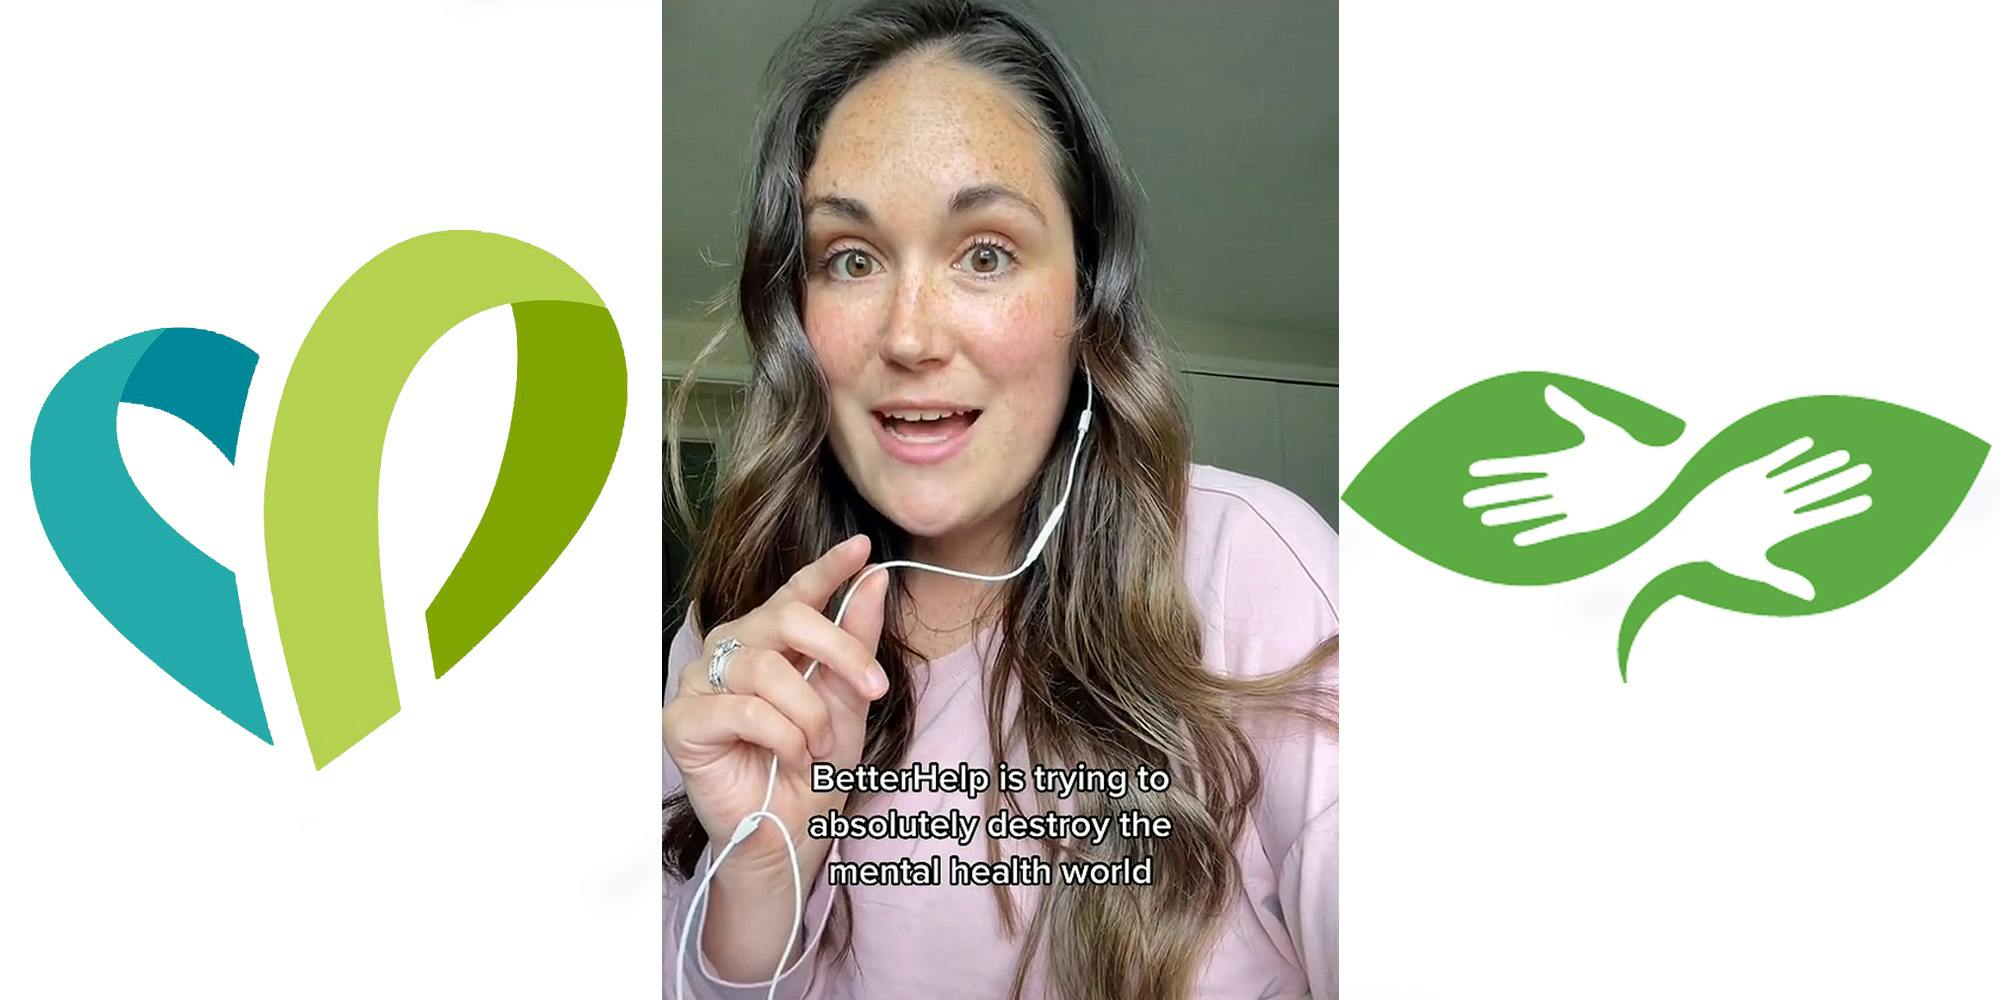 CareDash logo on white background (c) woman speaking into earbud microphone caption "BetterHelp is trying to absolutely destroy the mental health world" (c) BetterHelp logo on white background (r)